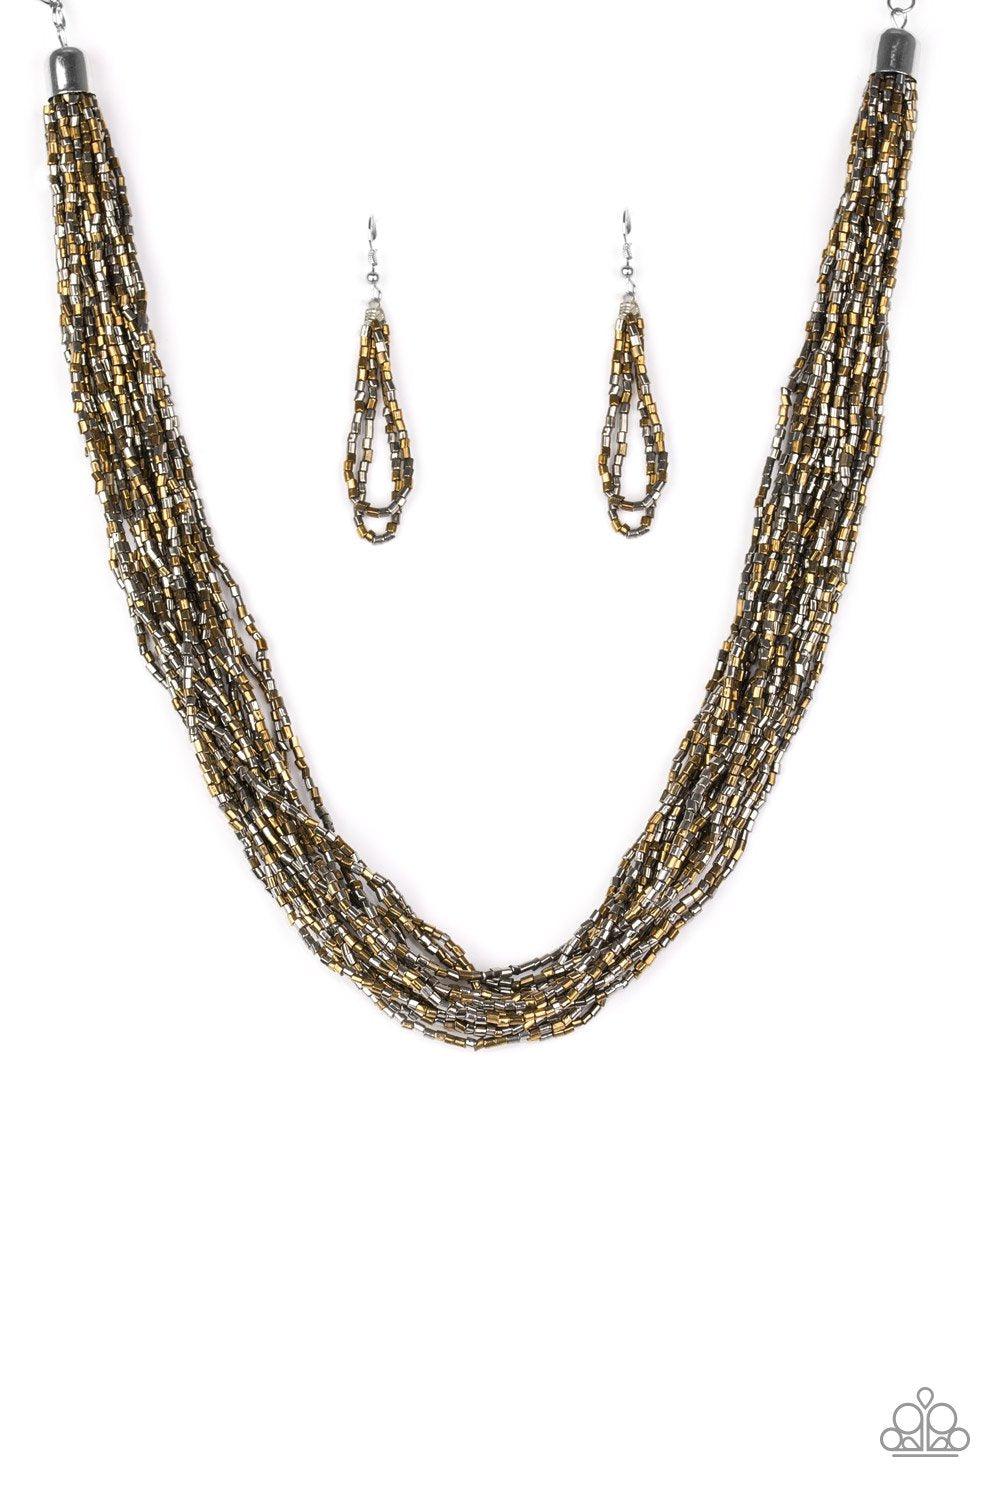 The Speed Of Starlight Brass and Gunmetal Seed Bead Necklace and Earrings - Paparazzi Accessories-CarasShop.com - $5 Jewelry by Cara Jewels